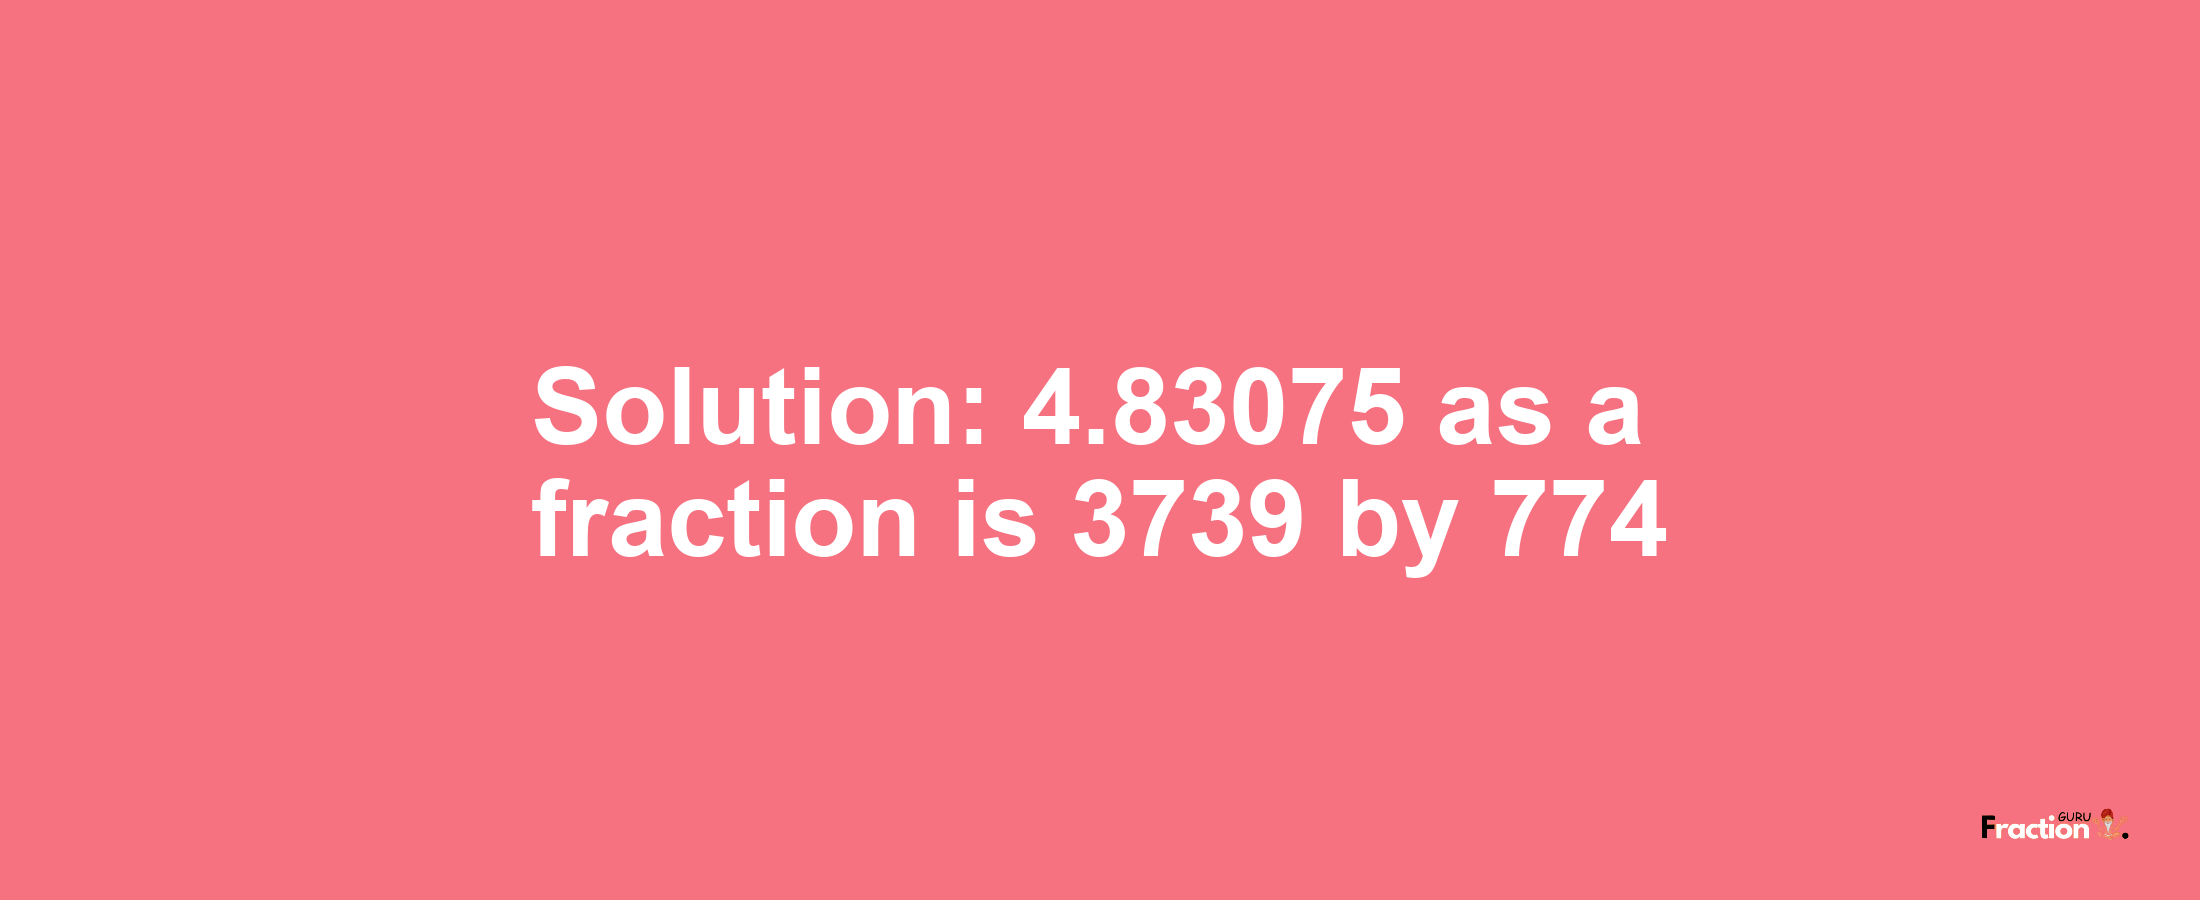 Solution:4.83075 as a fraction is 3739/774